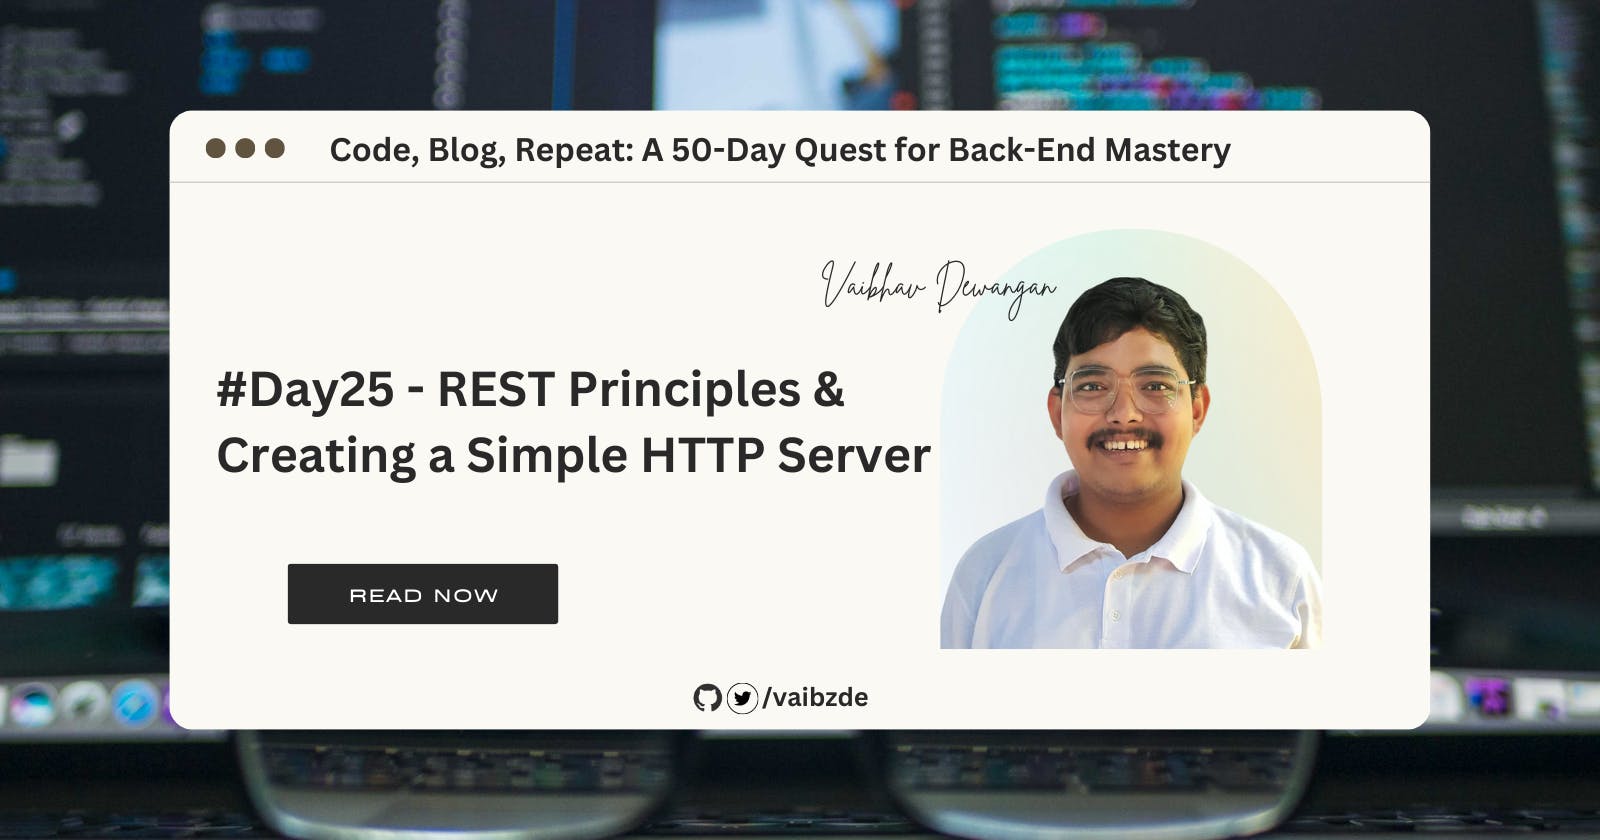 #Day25 - REST Principles & Creating a Simple HTTP Server